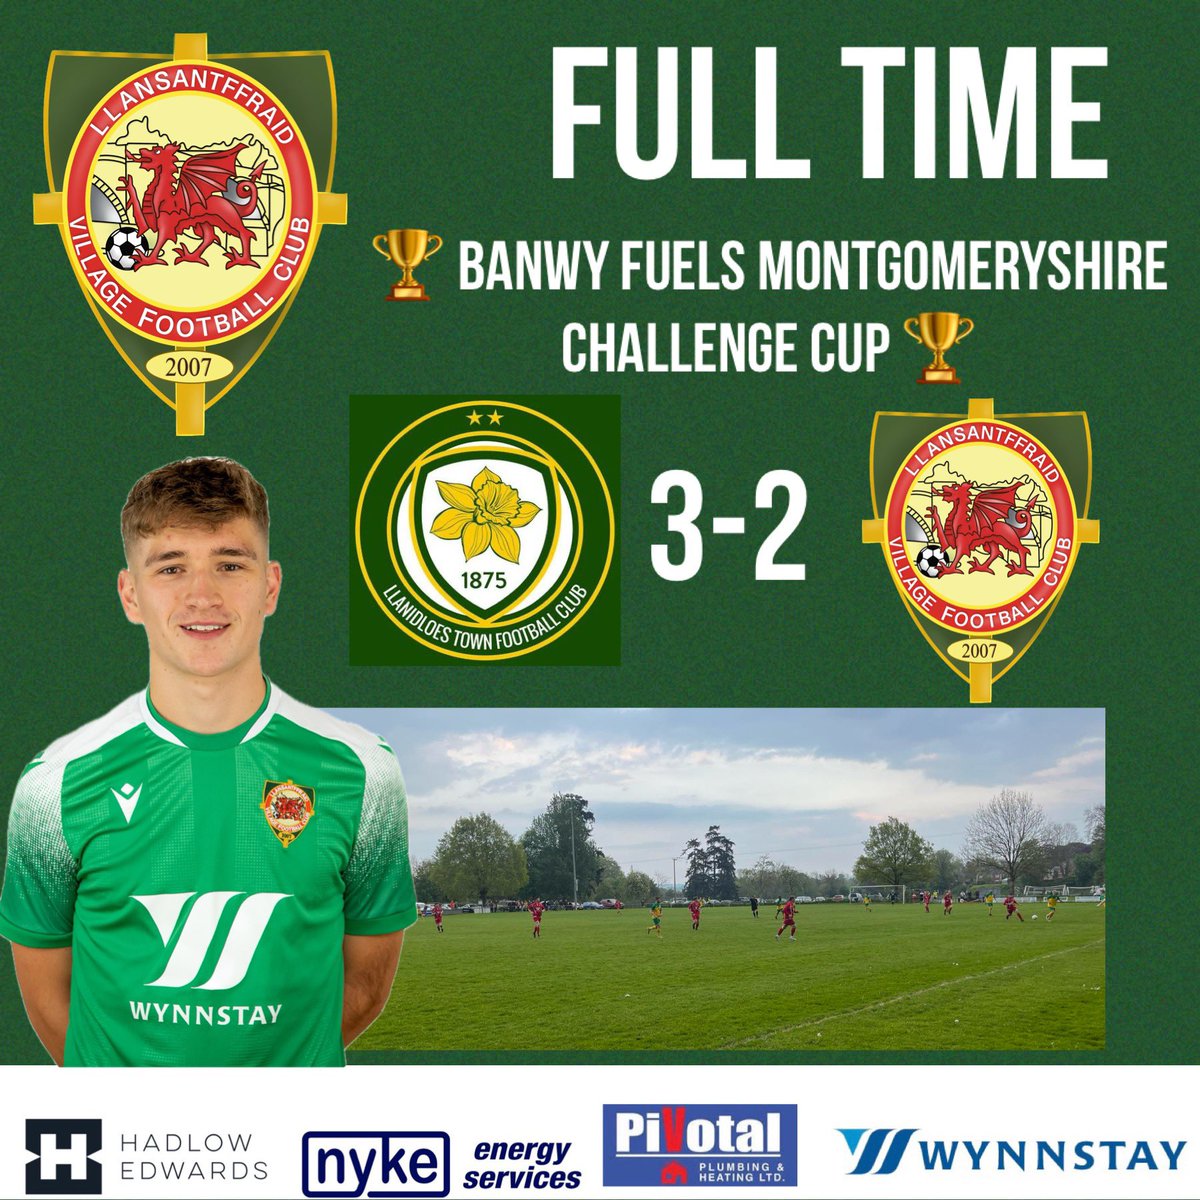 🟢⚪️ Full time ⚪️🟢
Llanidloes 3-2 Llansantffraid
The lads played very well against a higher tier opposition, but it wasn’t our day. Good luck to @LlaniTownfc in the final! 
⚽️ @OscarHerd1 
⚽️ @adambiggs99 
@wynnstay
@PivotalPlumbing 
@NykeEnergy 
@MacronWrexham